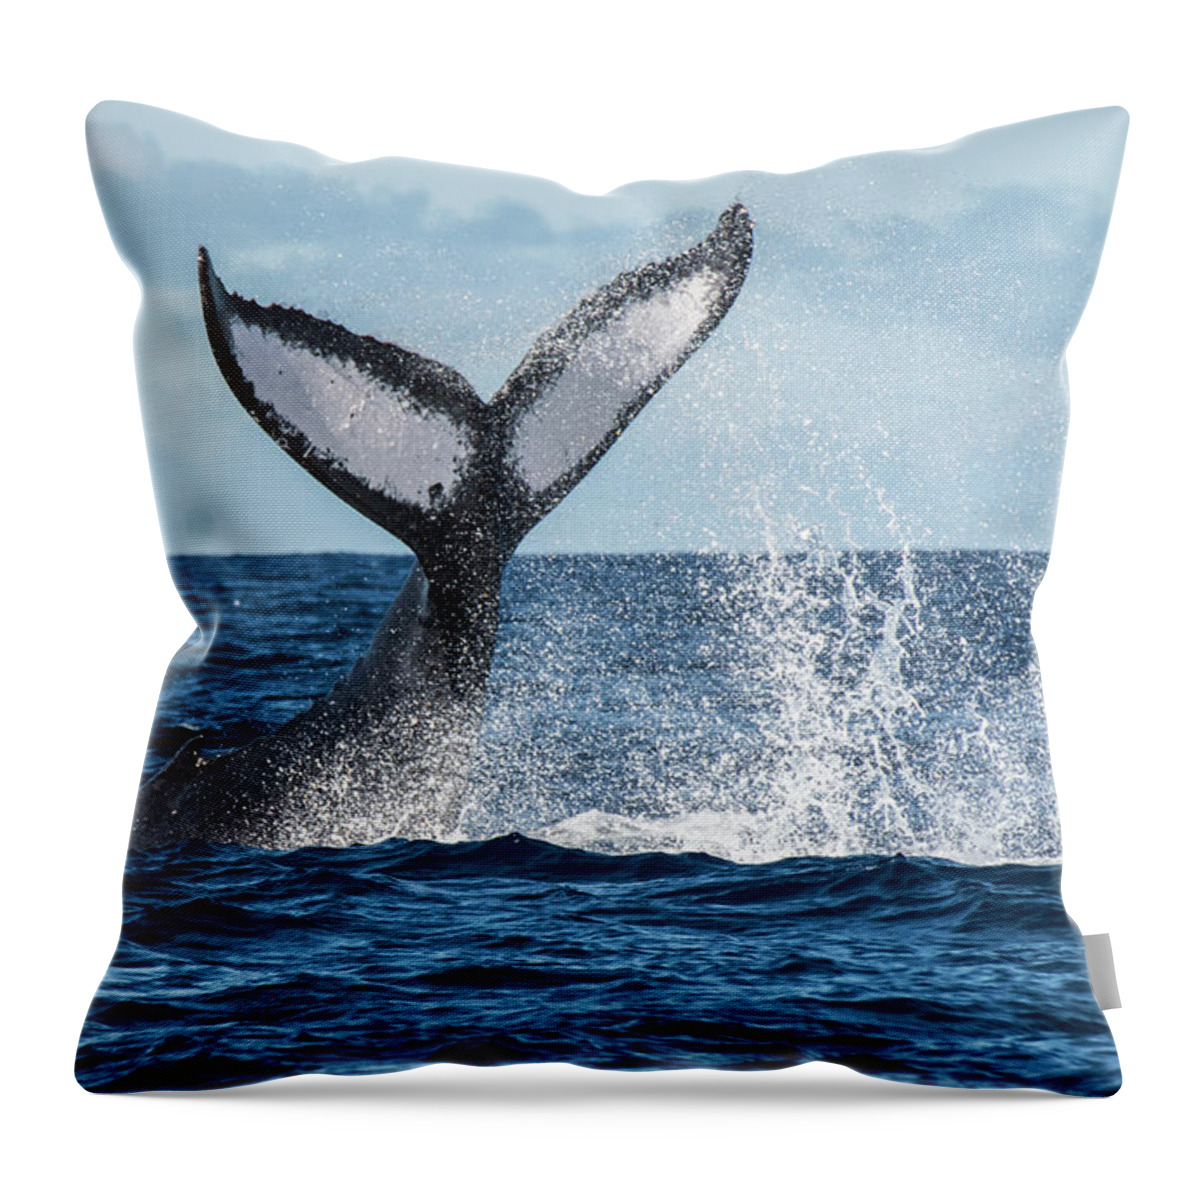 Hawaii Throw Pillow featuring the photograph Humpback Whale Off The Coast Of Maui by Matt McDonald